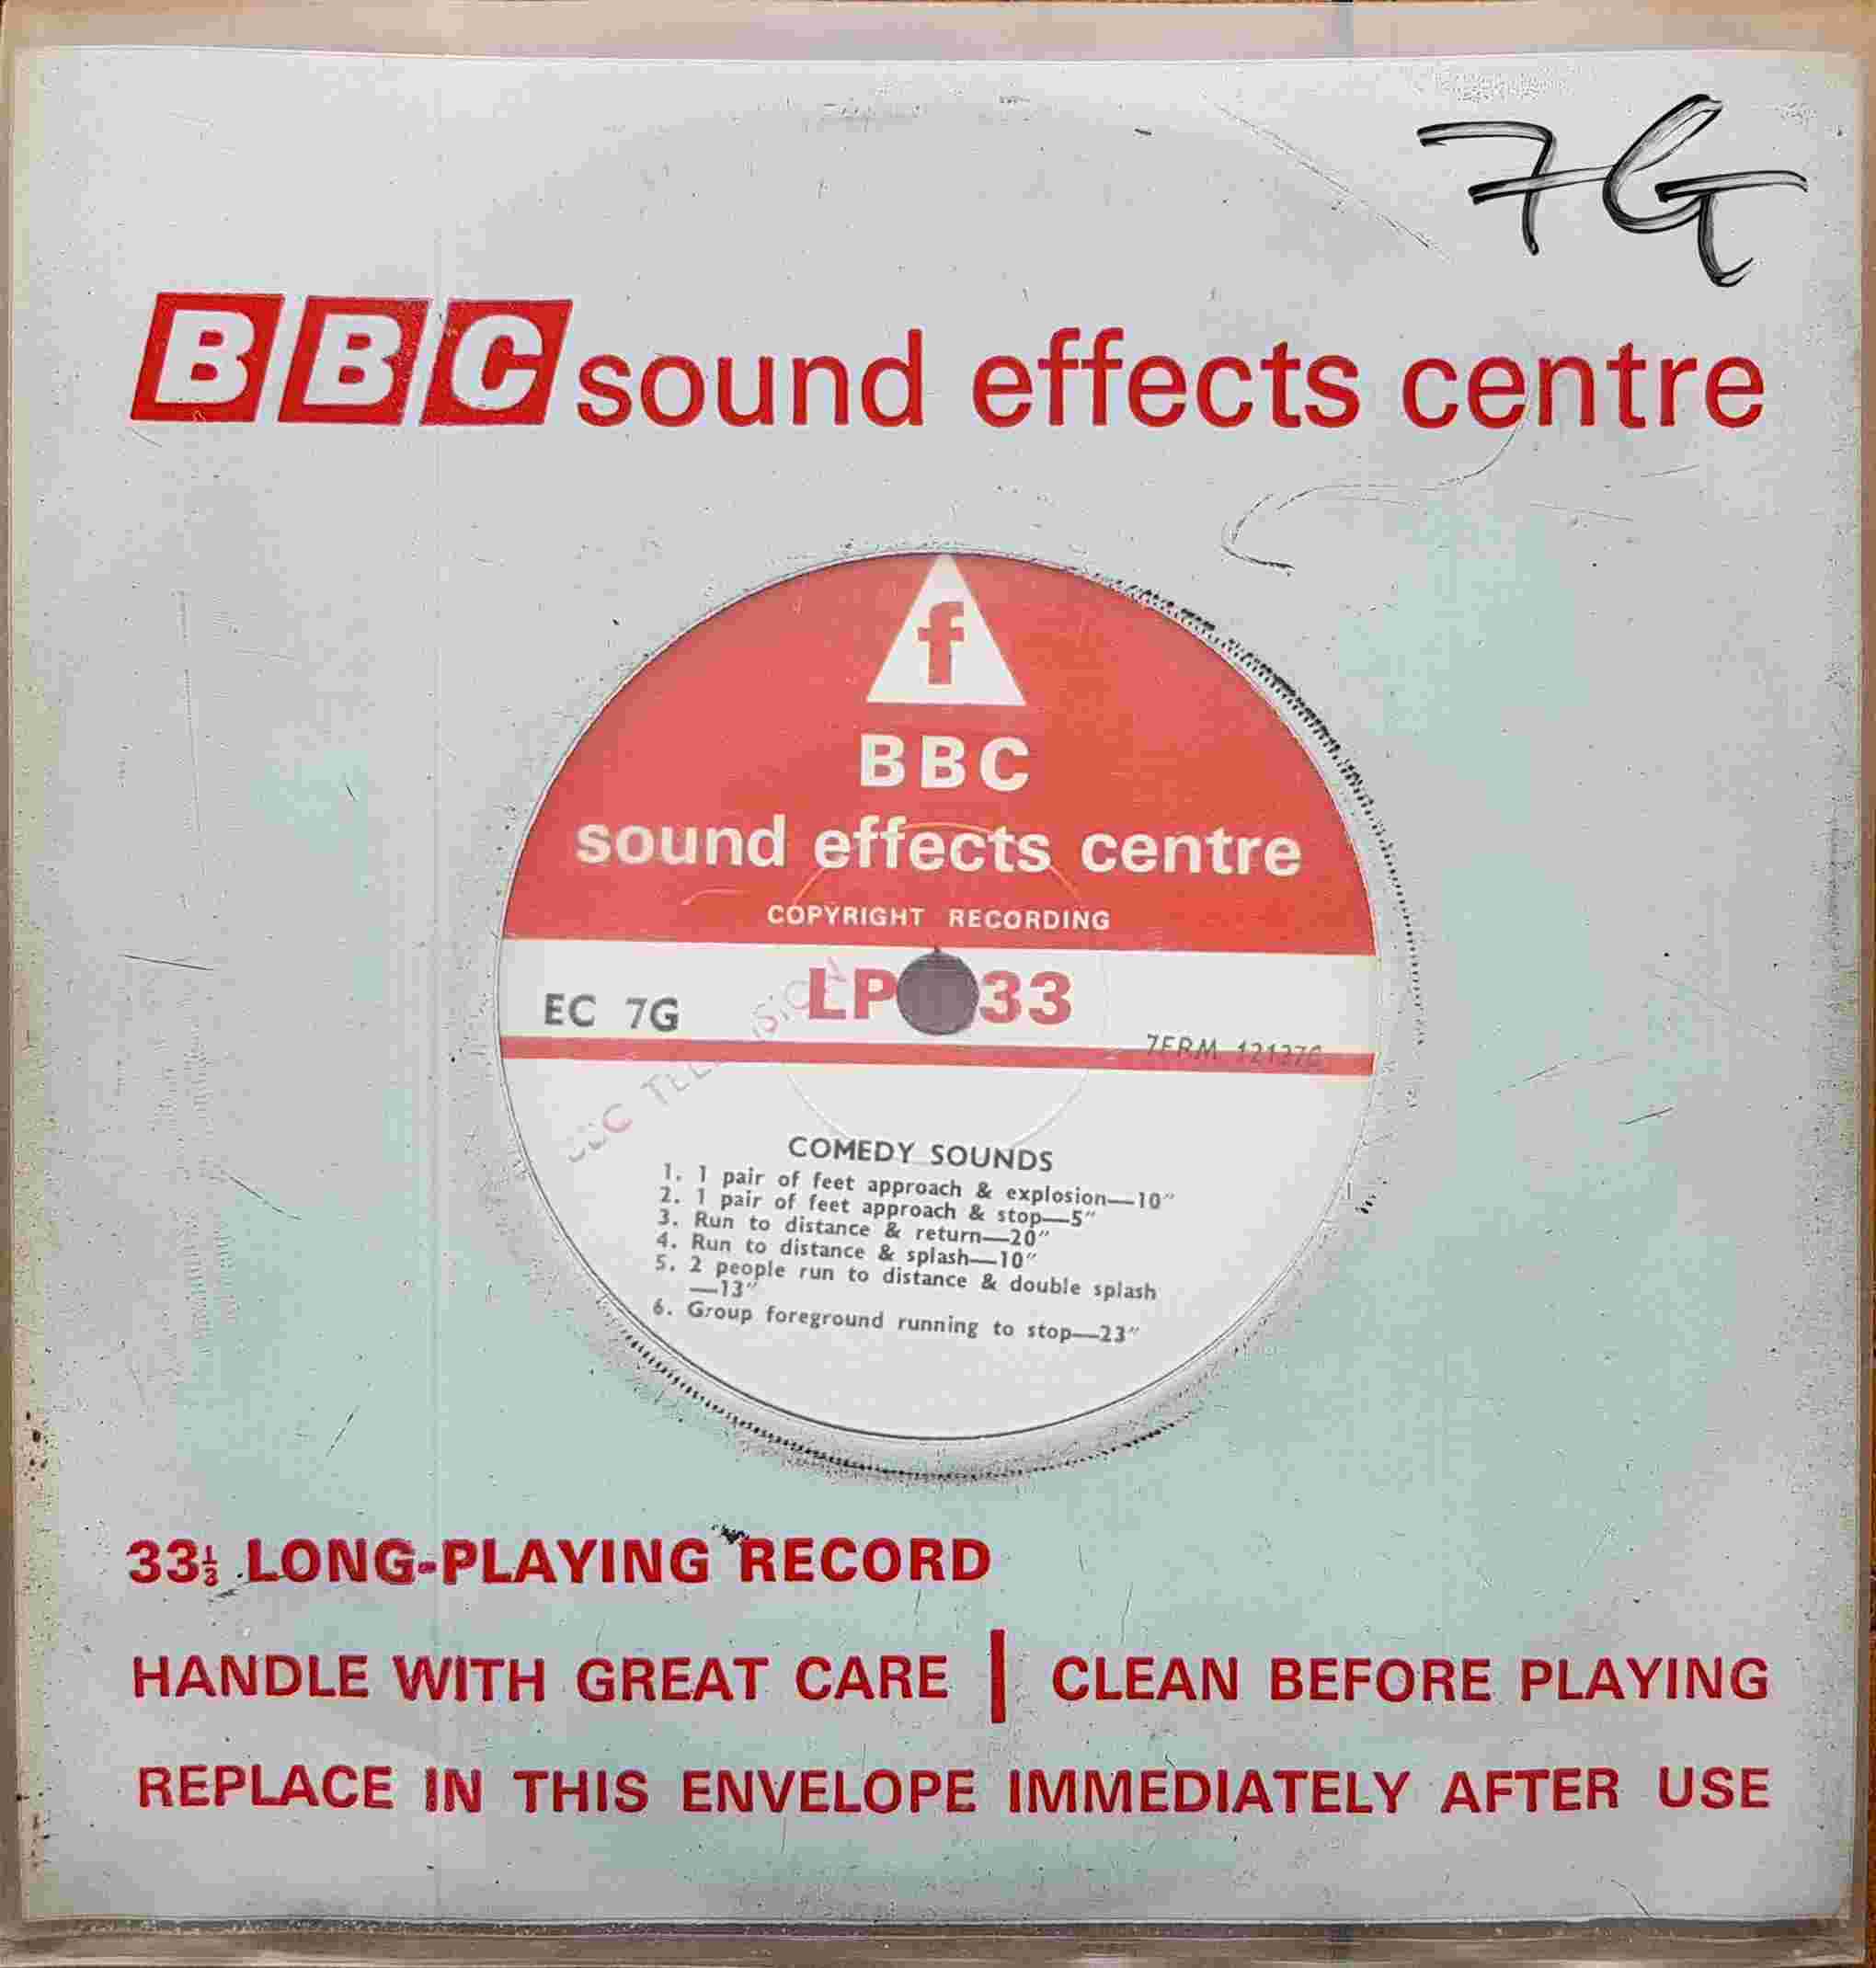 Picture of EC 7G Comedy sounds by artist Not registered from the BBC singles - Records and Tapes library